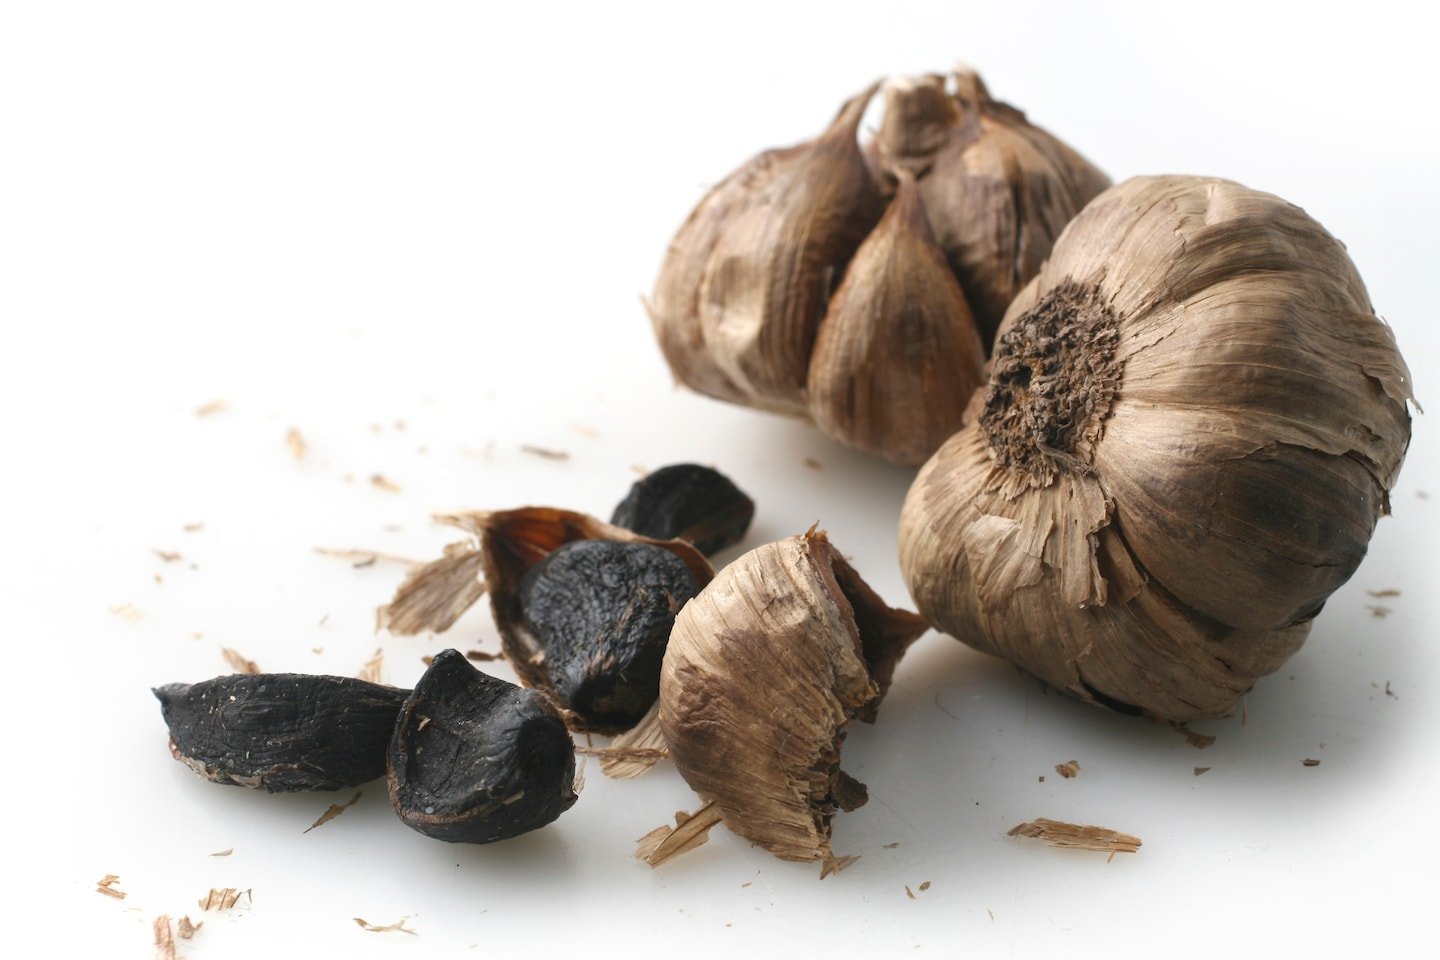 Black garlic’s pricey. Here’s how to make your own — no fermenting required.